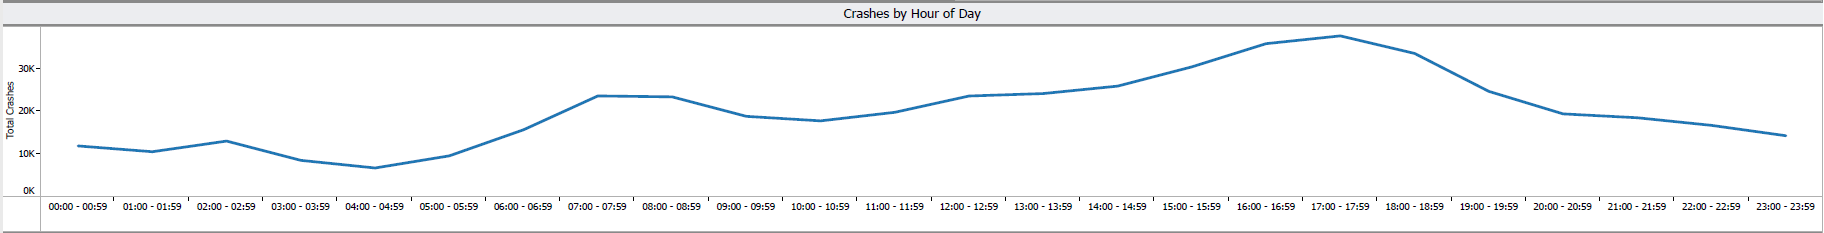 Graph - 2012 to 2021 Crashes by Hour of Day